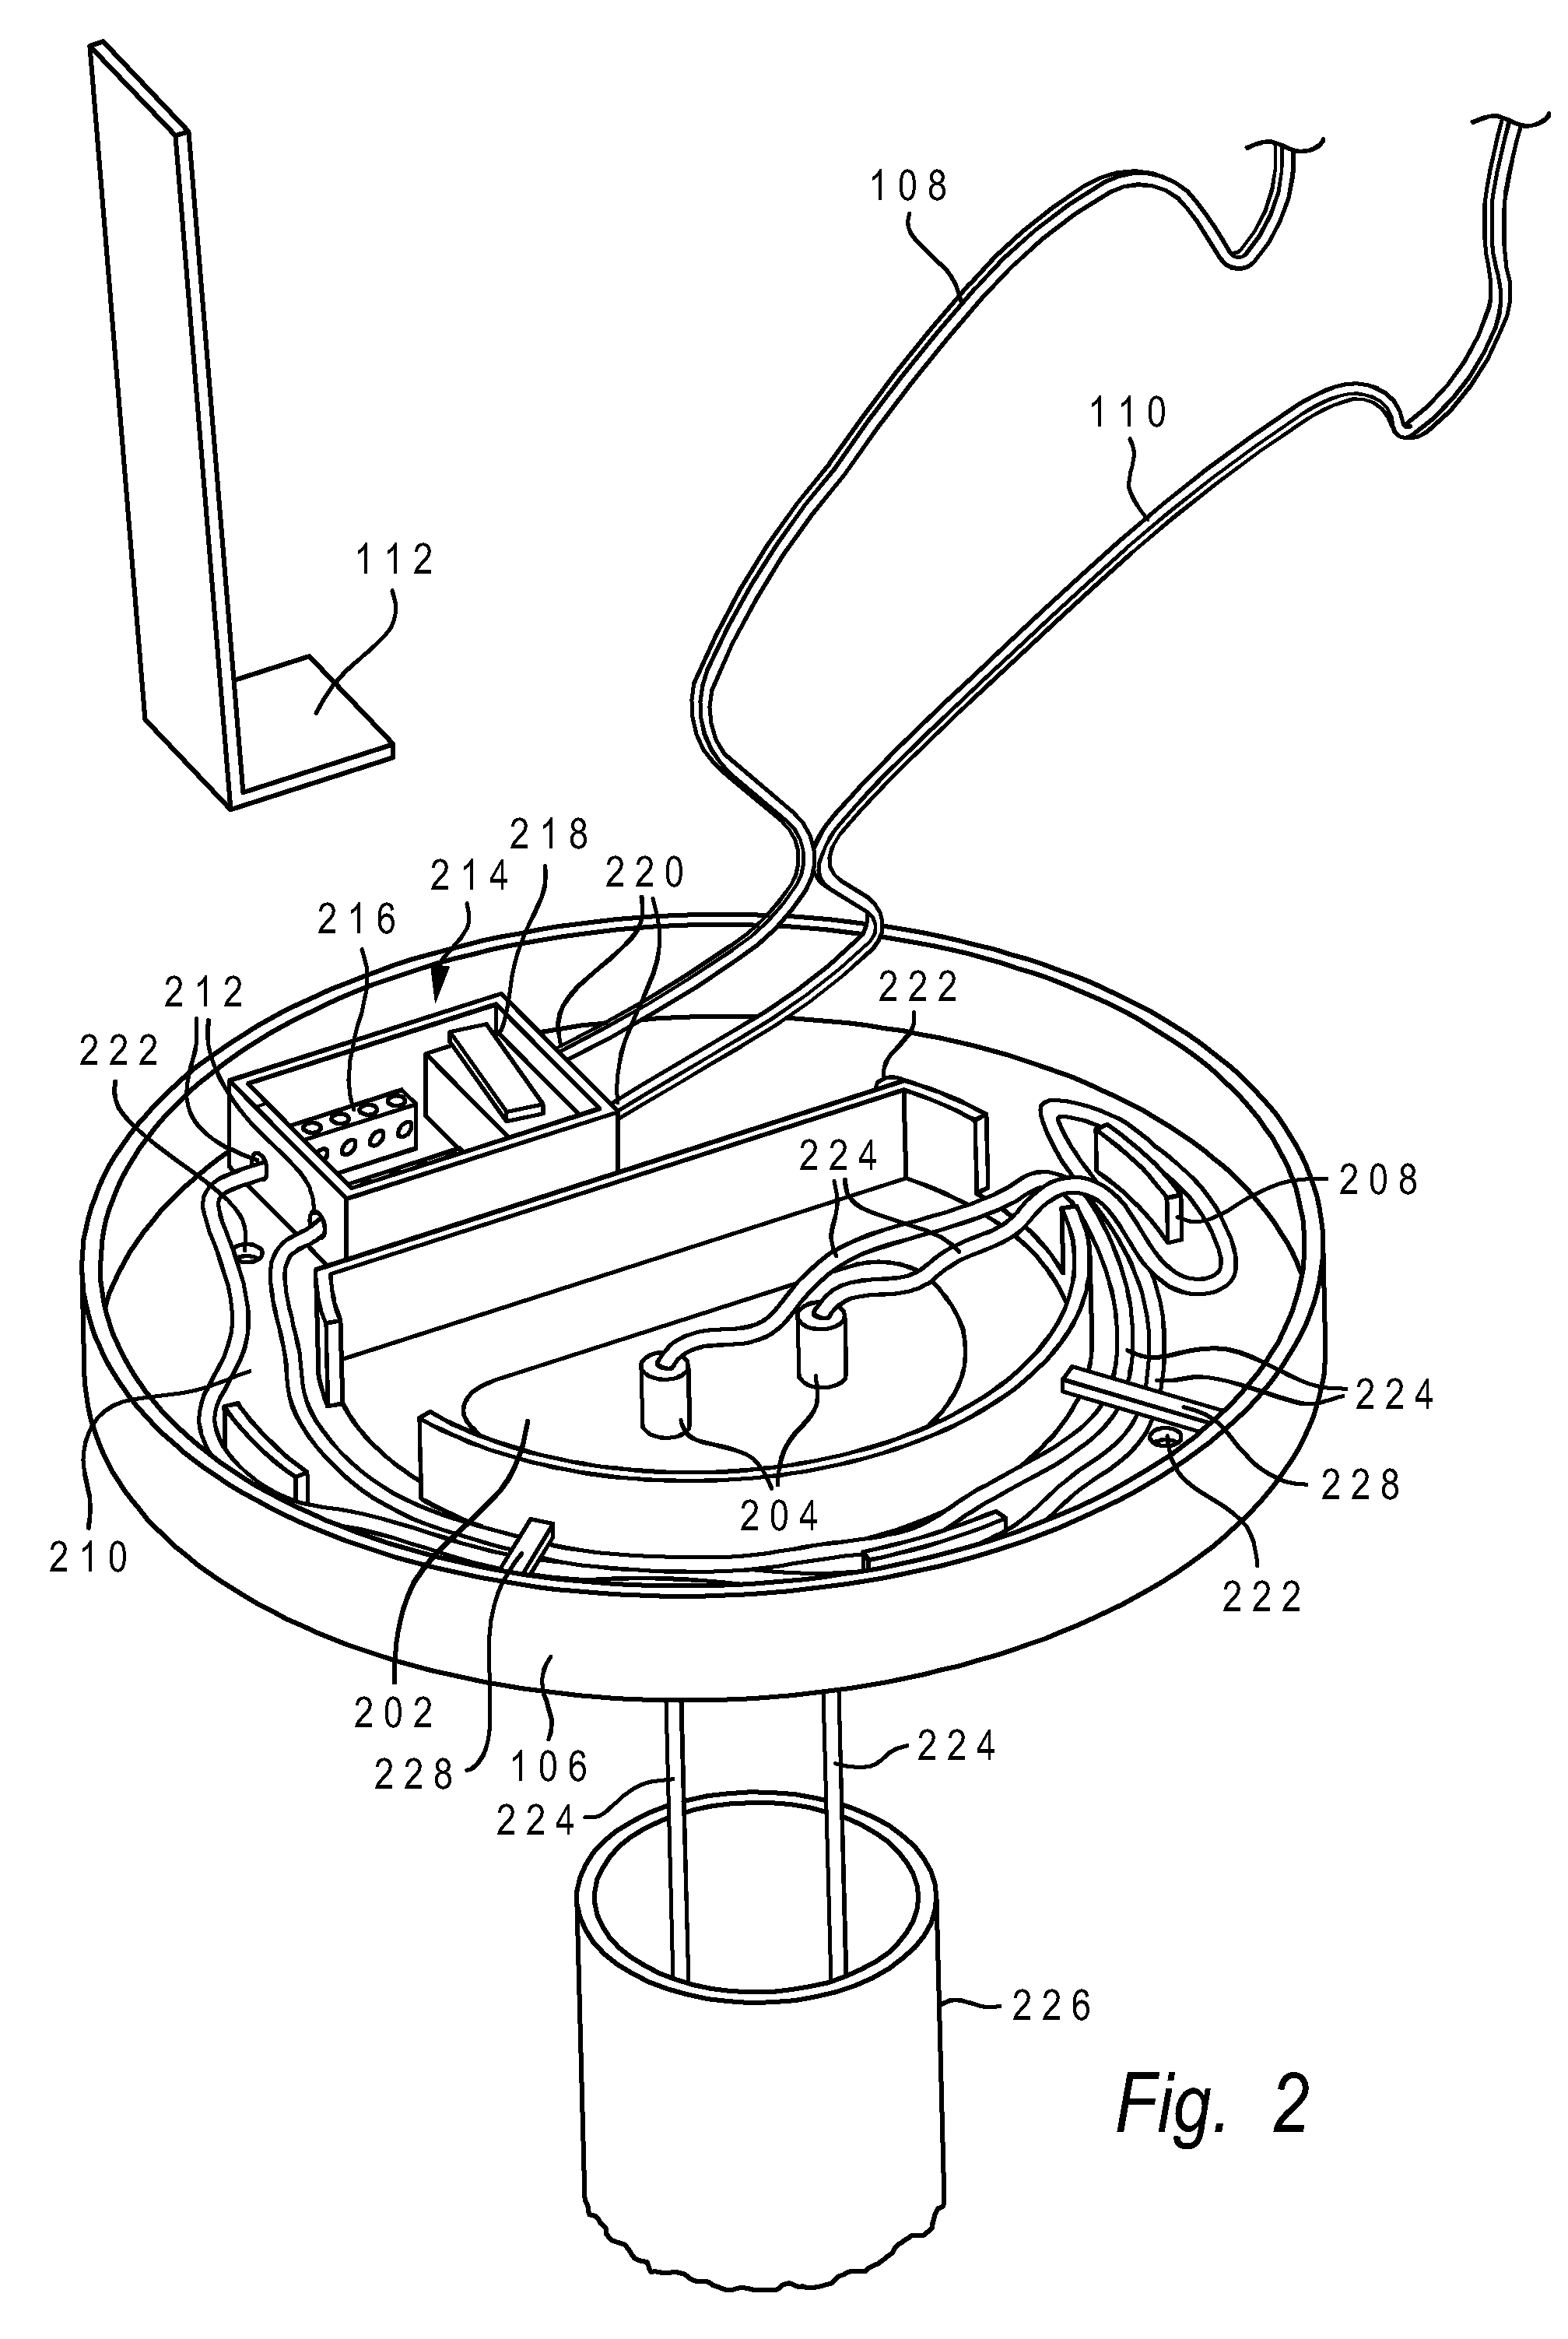 Break away base for electrical device